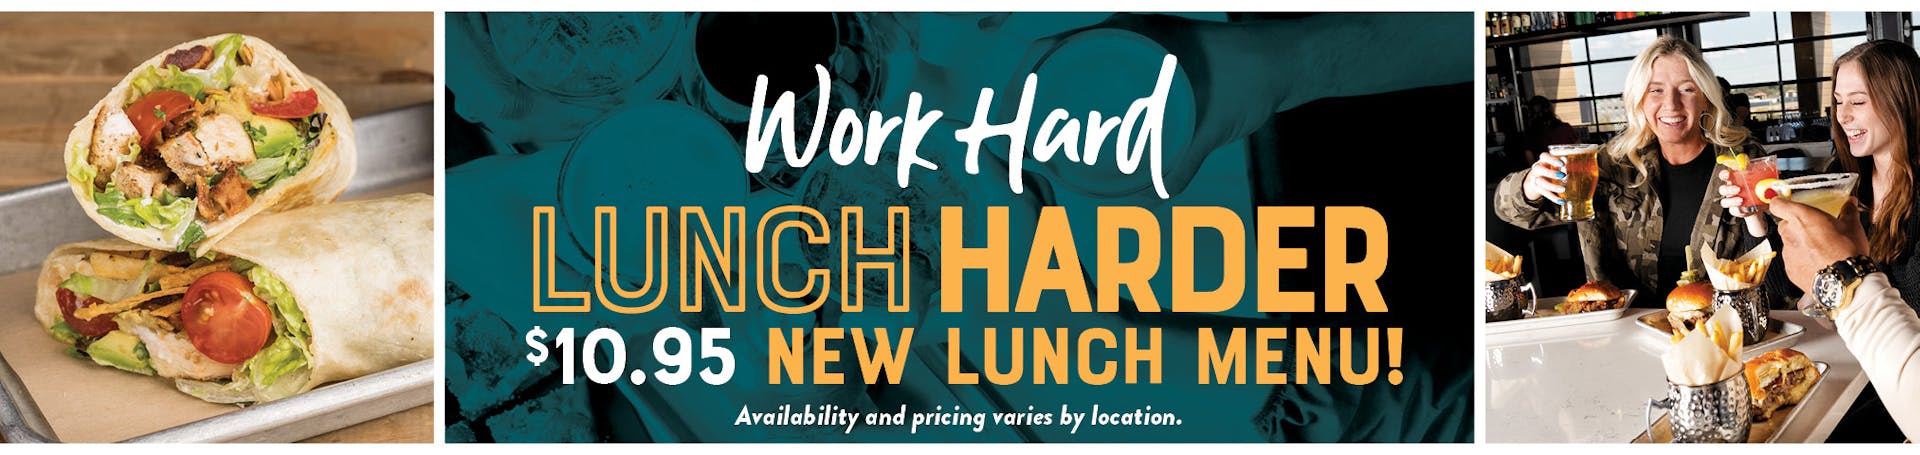 Image friends toasting over lunch with drinks in hand and food on the table. Work Hard Lunch Harder. $9.95 New Lunch Menu! availbility and pricing varies by location.